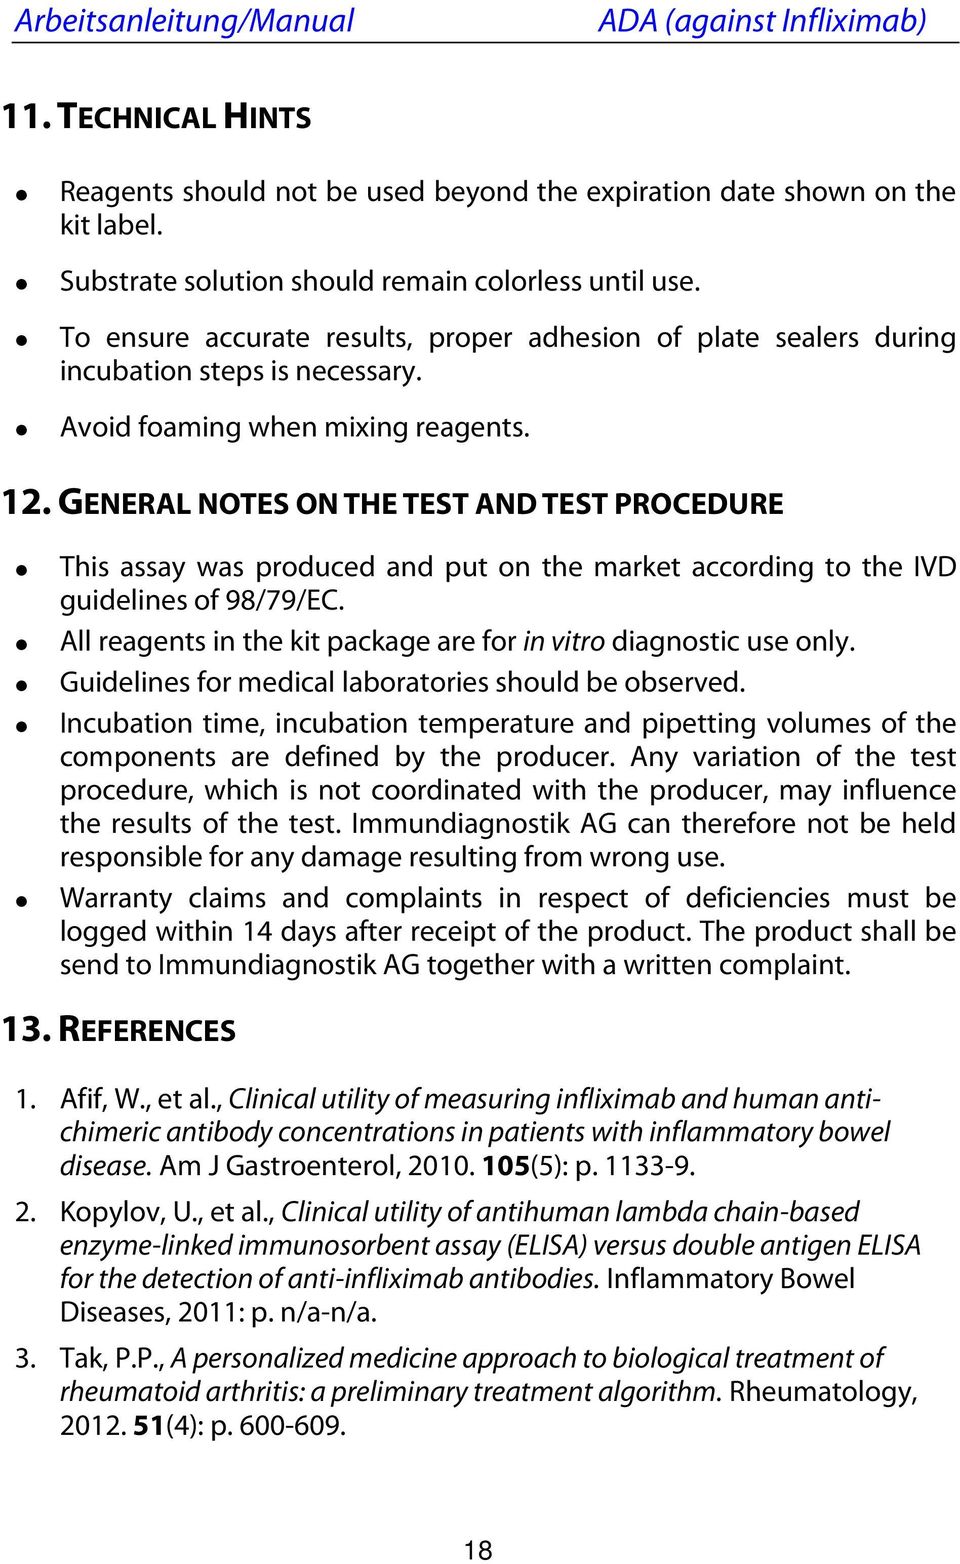 GENERAL NOTES ON THE TEST AND TEST PROCEDURE This assay was produced and put on the market according to the IVD guidelines of 98/79/EC.